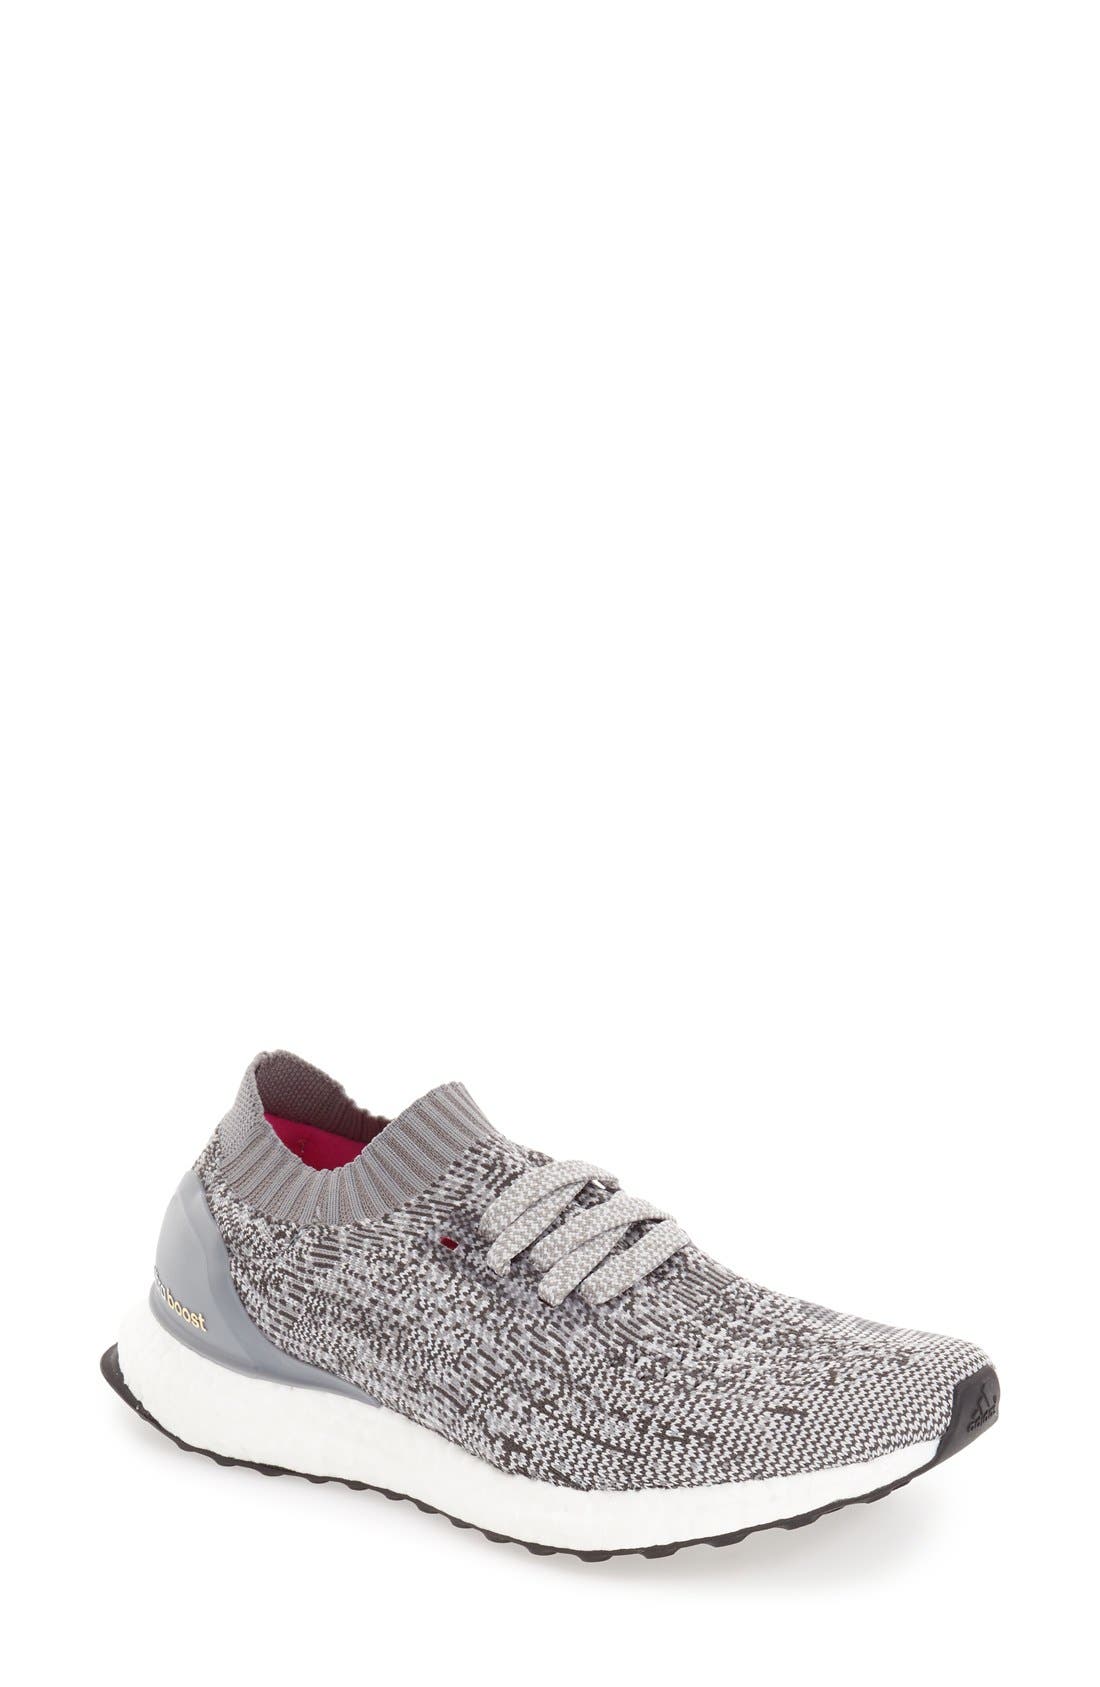 adidas boost uncaged womens